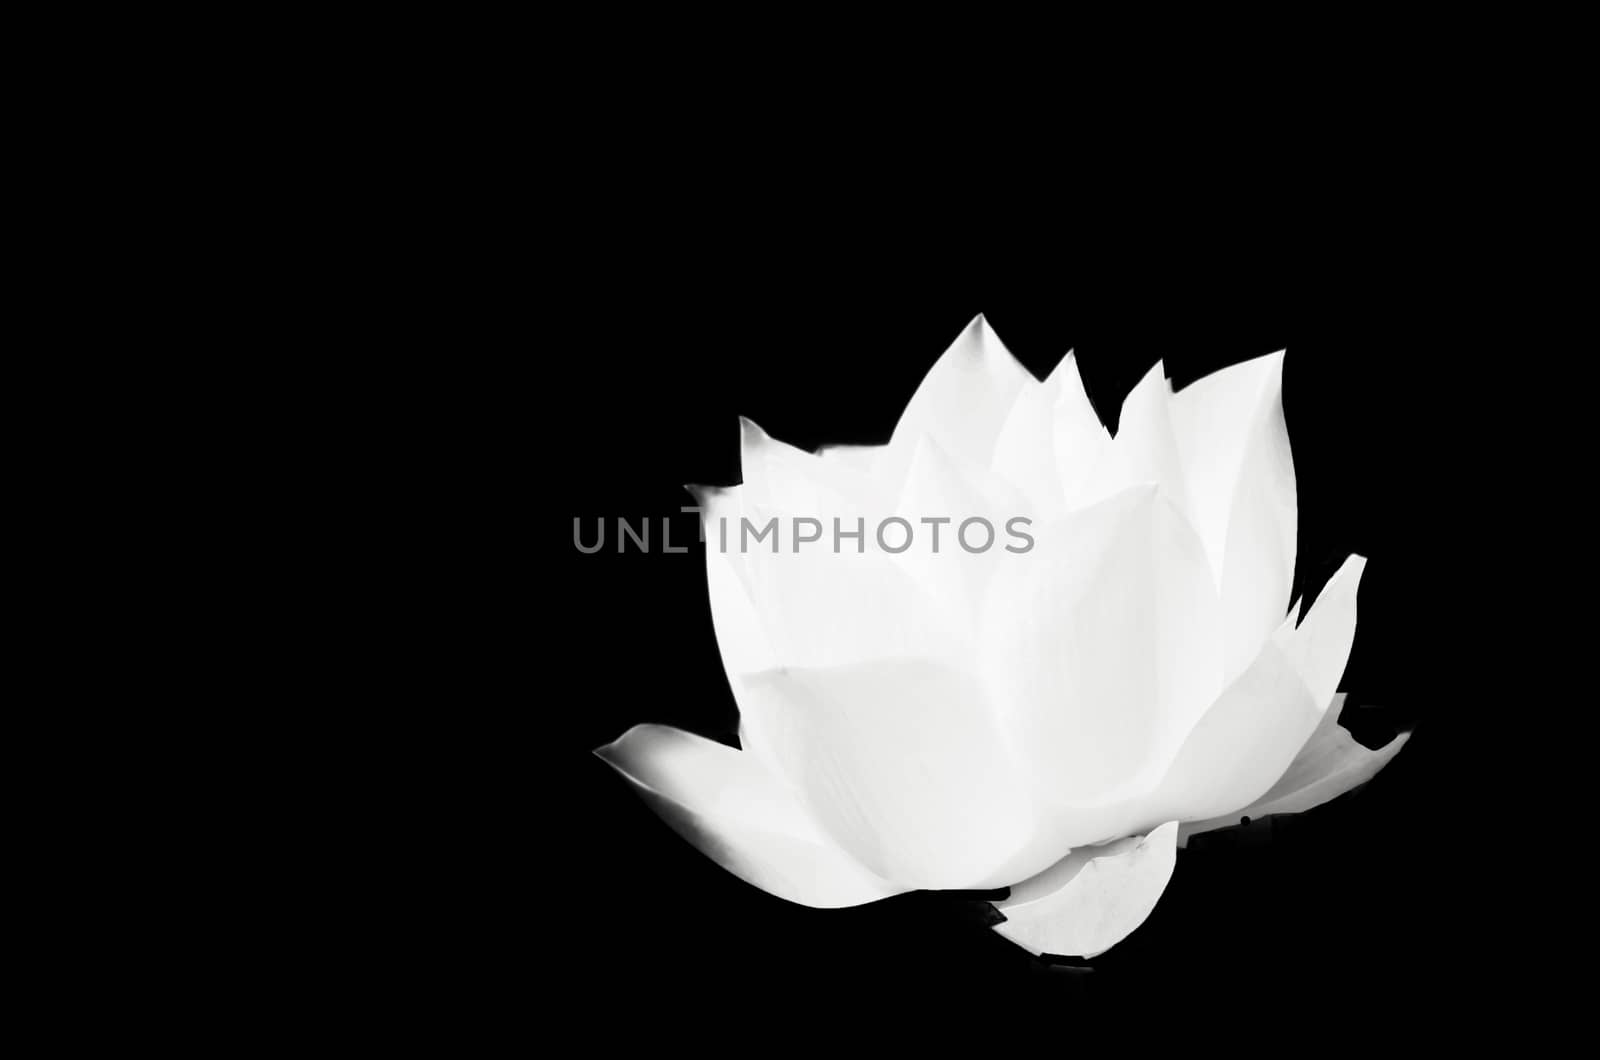 The white lotus on solid black background.